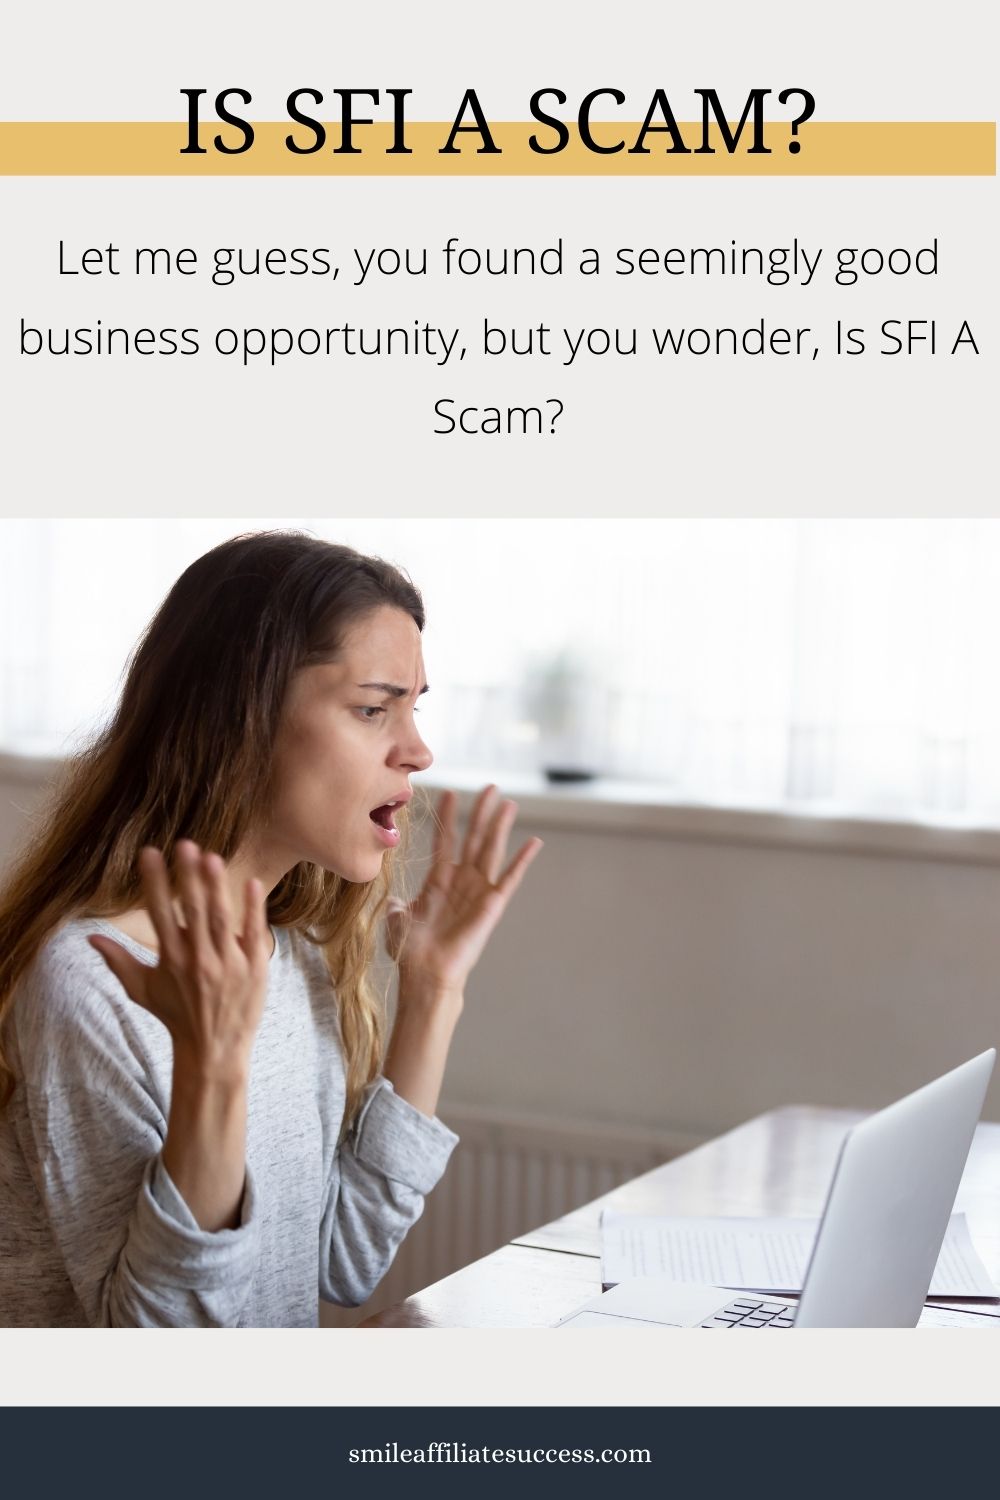 Is SFI A Scam?